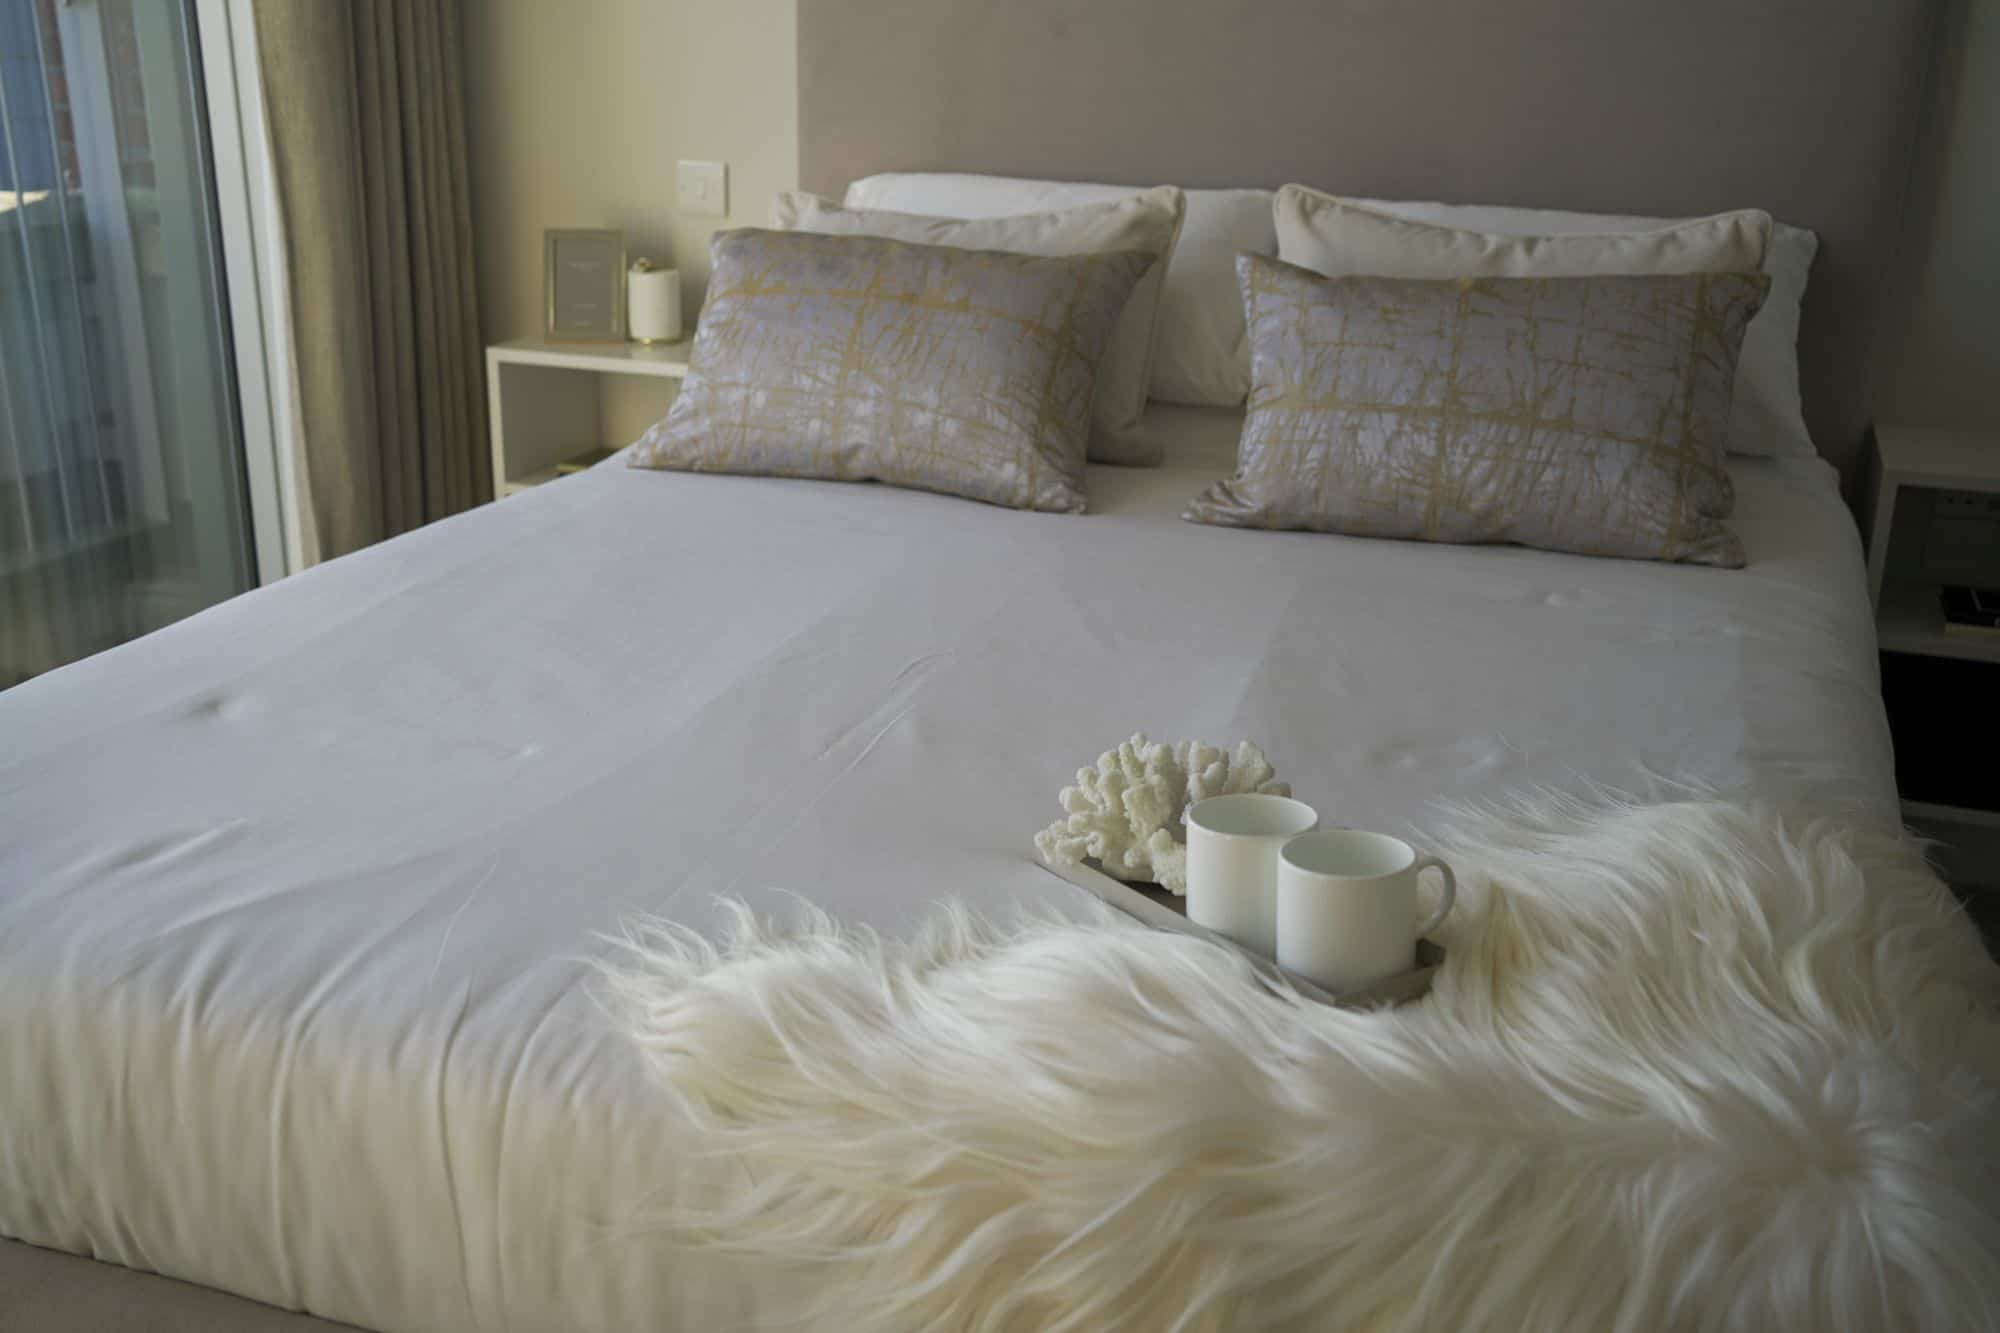 Double bed in a master bedroom with neutral colour covers and cushions, with a coffee mug tray and white fur-style rug at the bottom of the bed